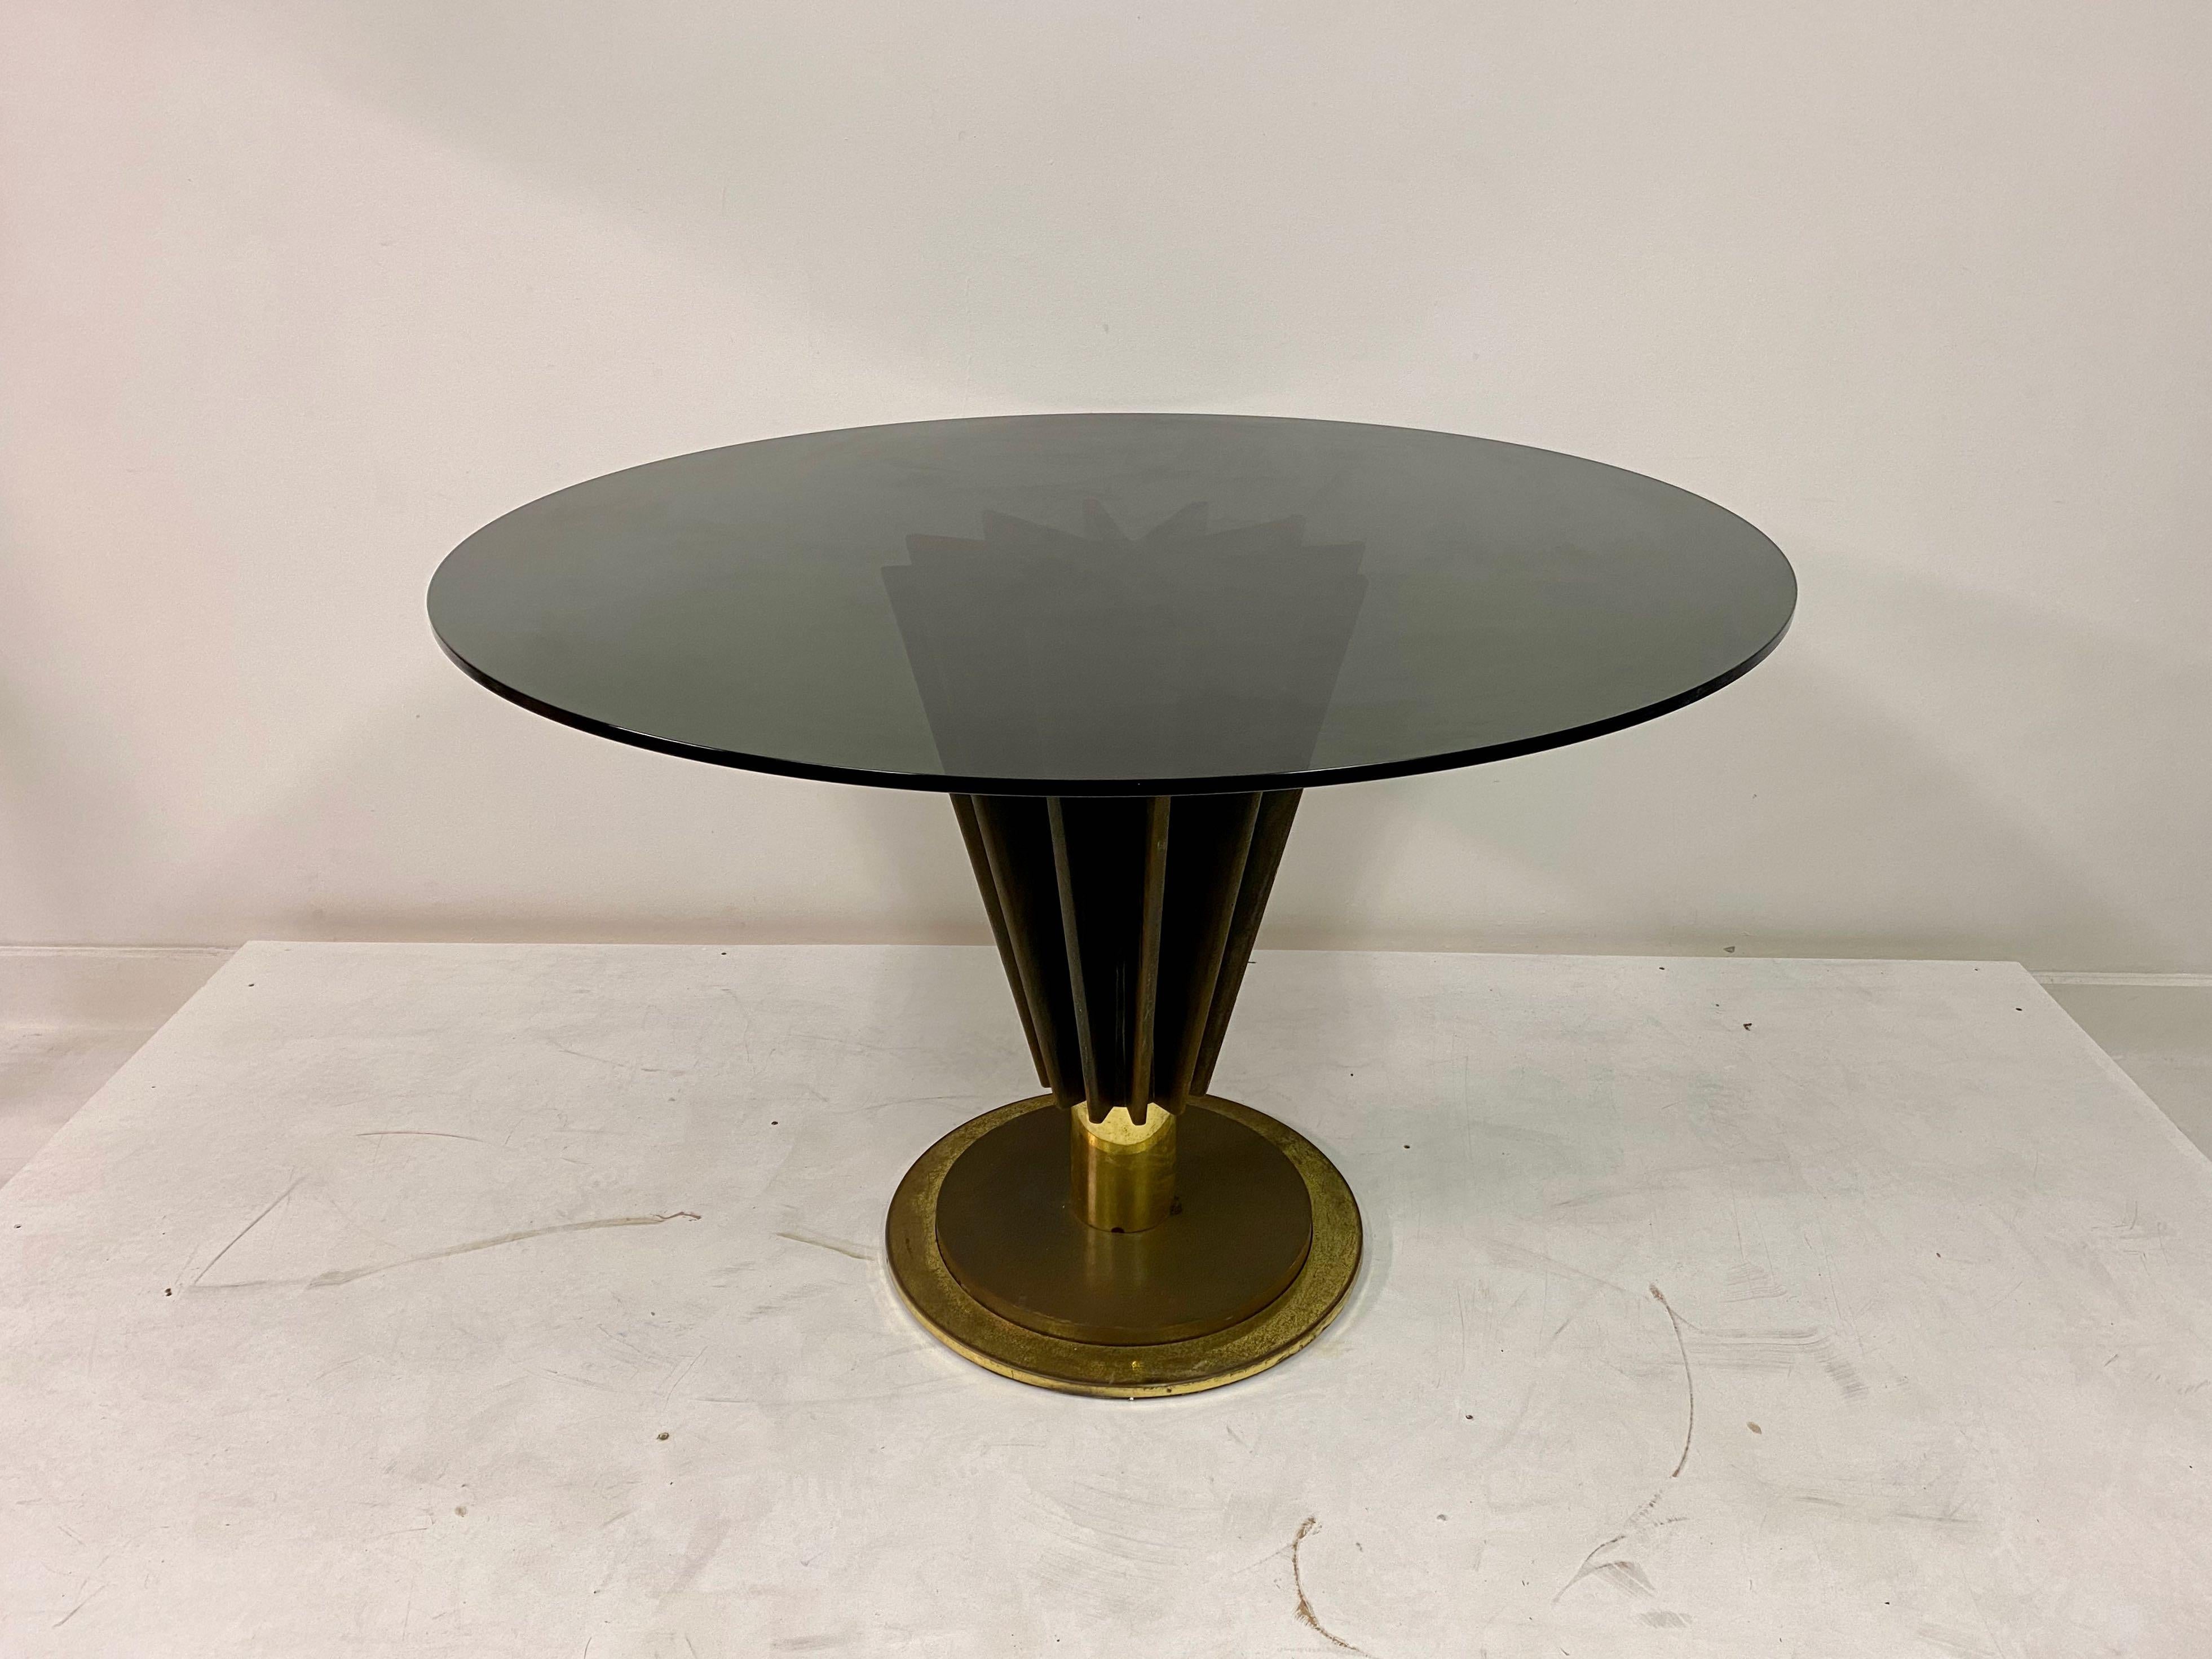 Dining table

By Pierre Cardin

One pedestal

Round smoked glass top

Iron and brass base

Signed

1970s, Italian

Glass can be changed to clear if preferred

Brass can be polished if desired.